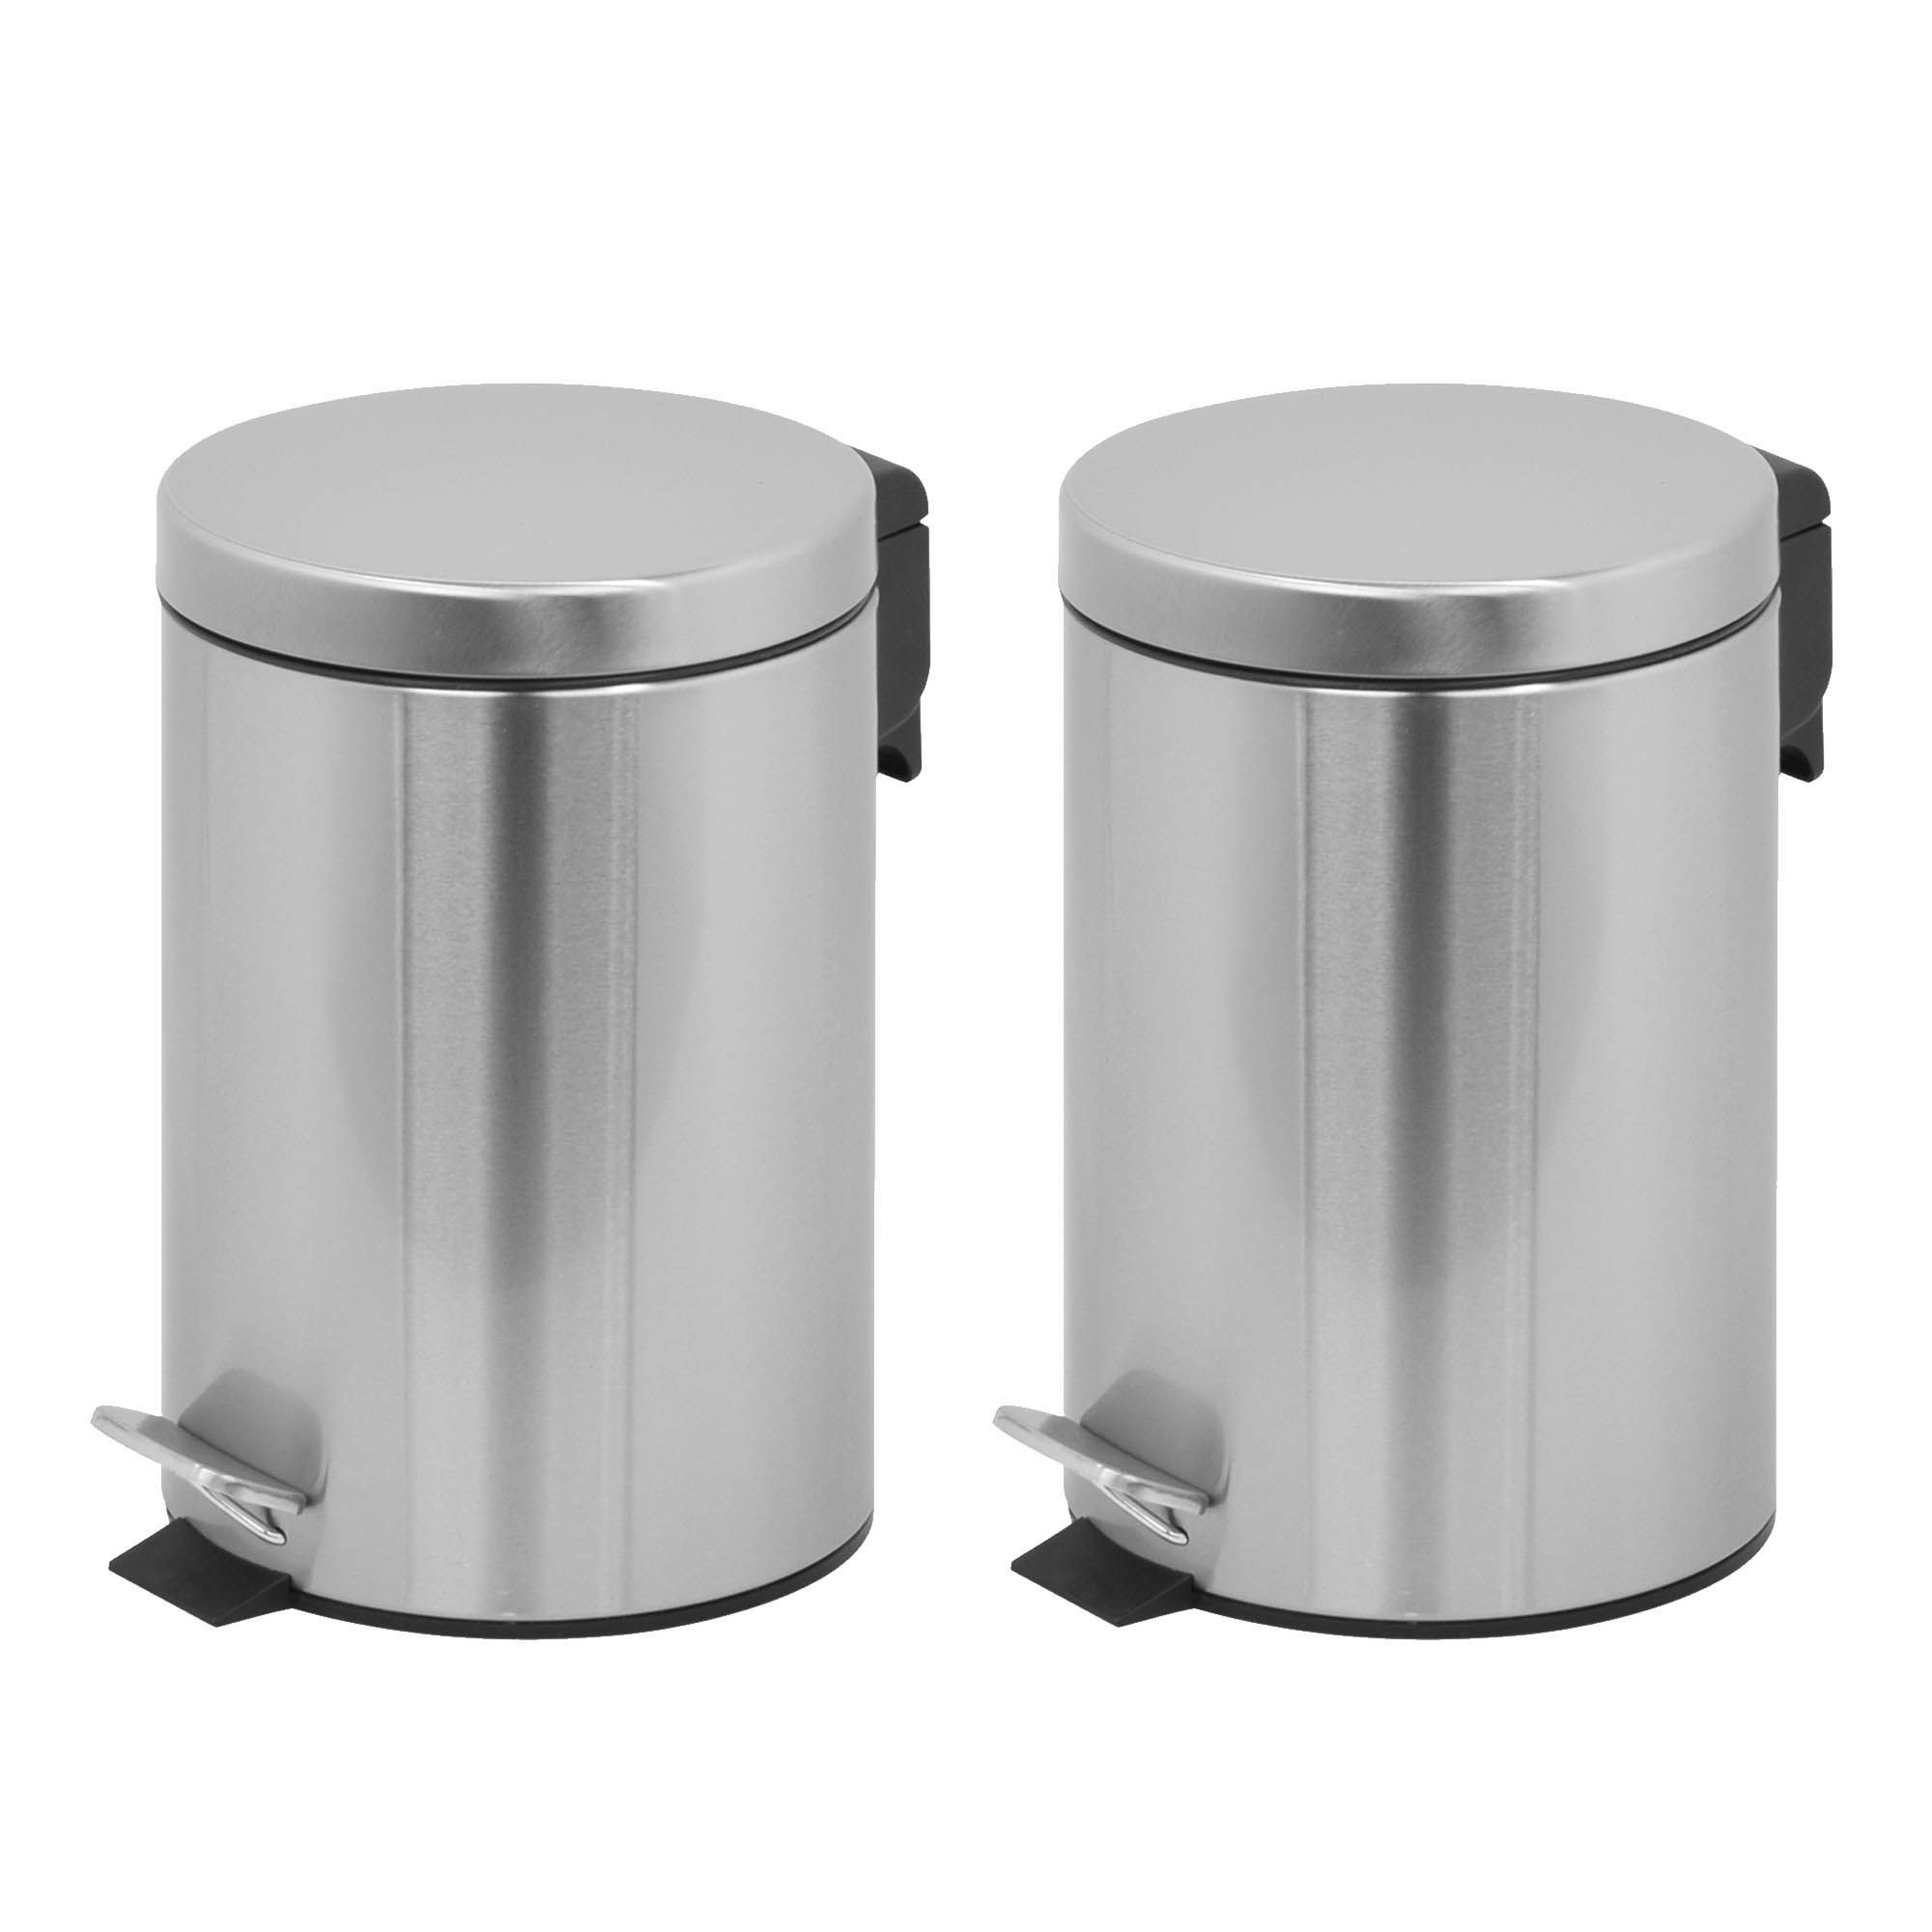 Innovaze 2.6 Gal./10 Liter Slim Stainless Steel Step-On Trash Can for Bathroom and Office - Silver